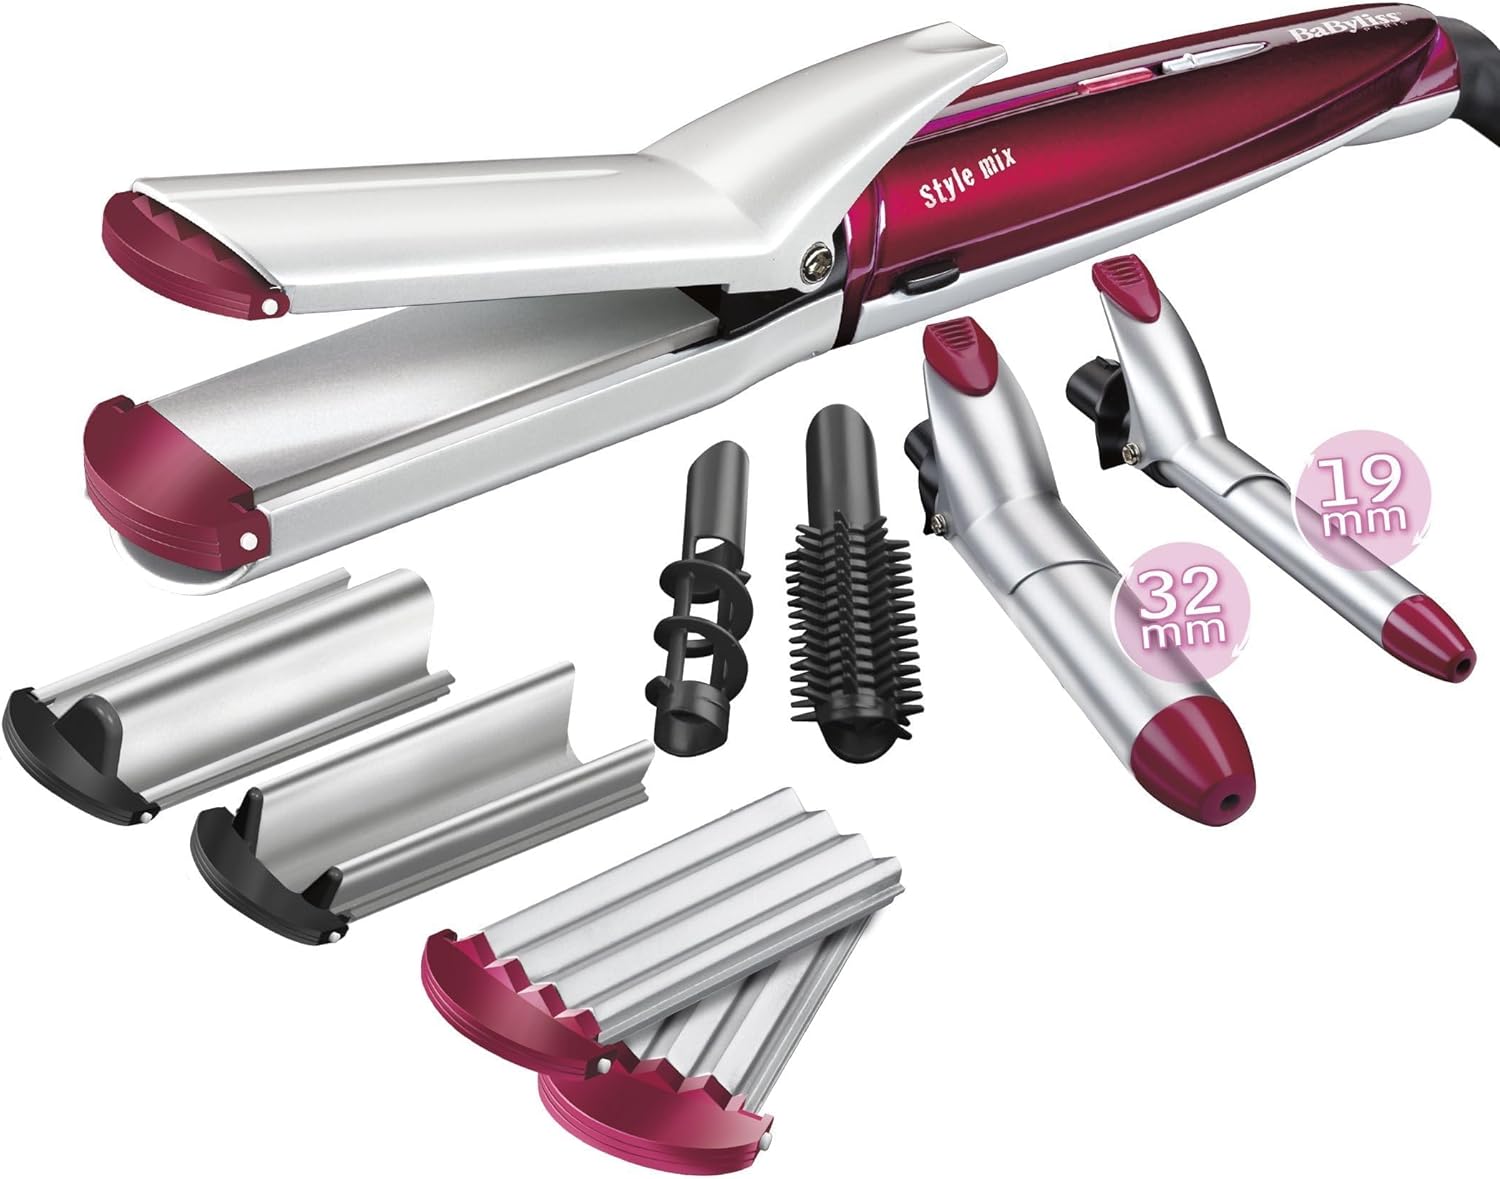 Babyliss MS22SDE Multi Hair Styles 10 Attachments